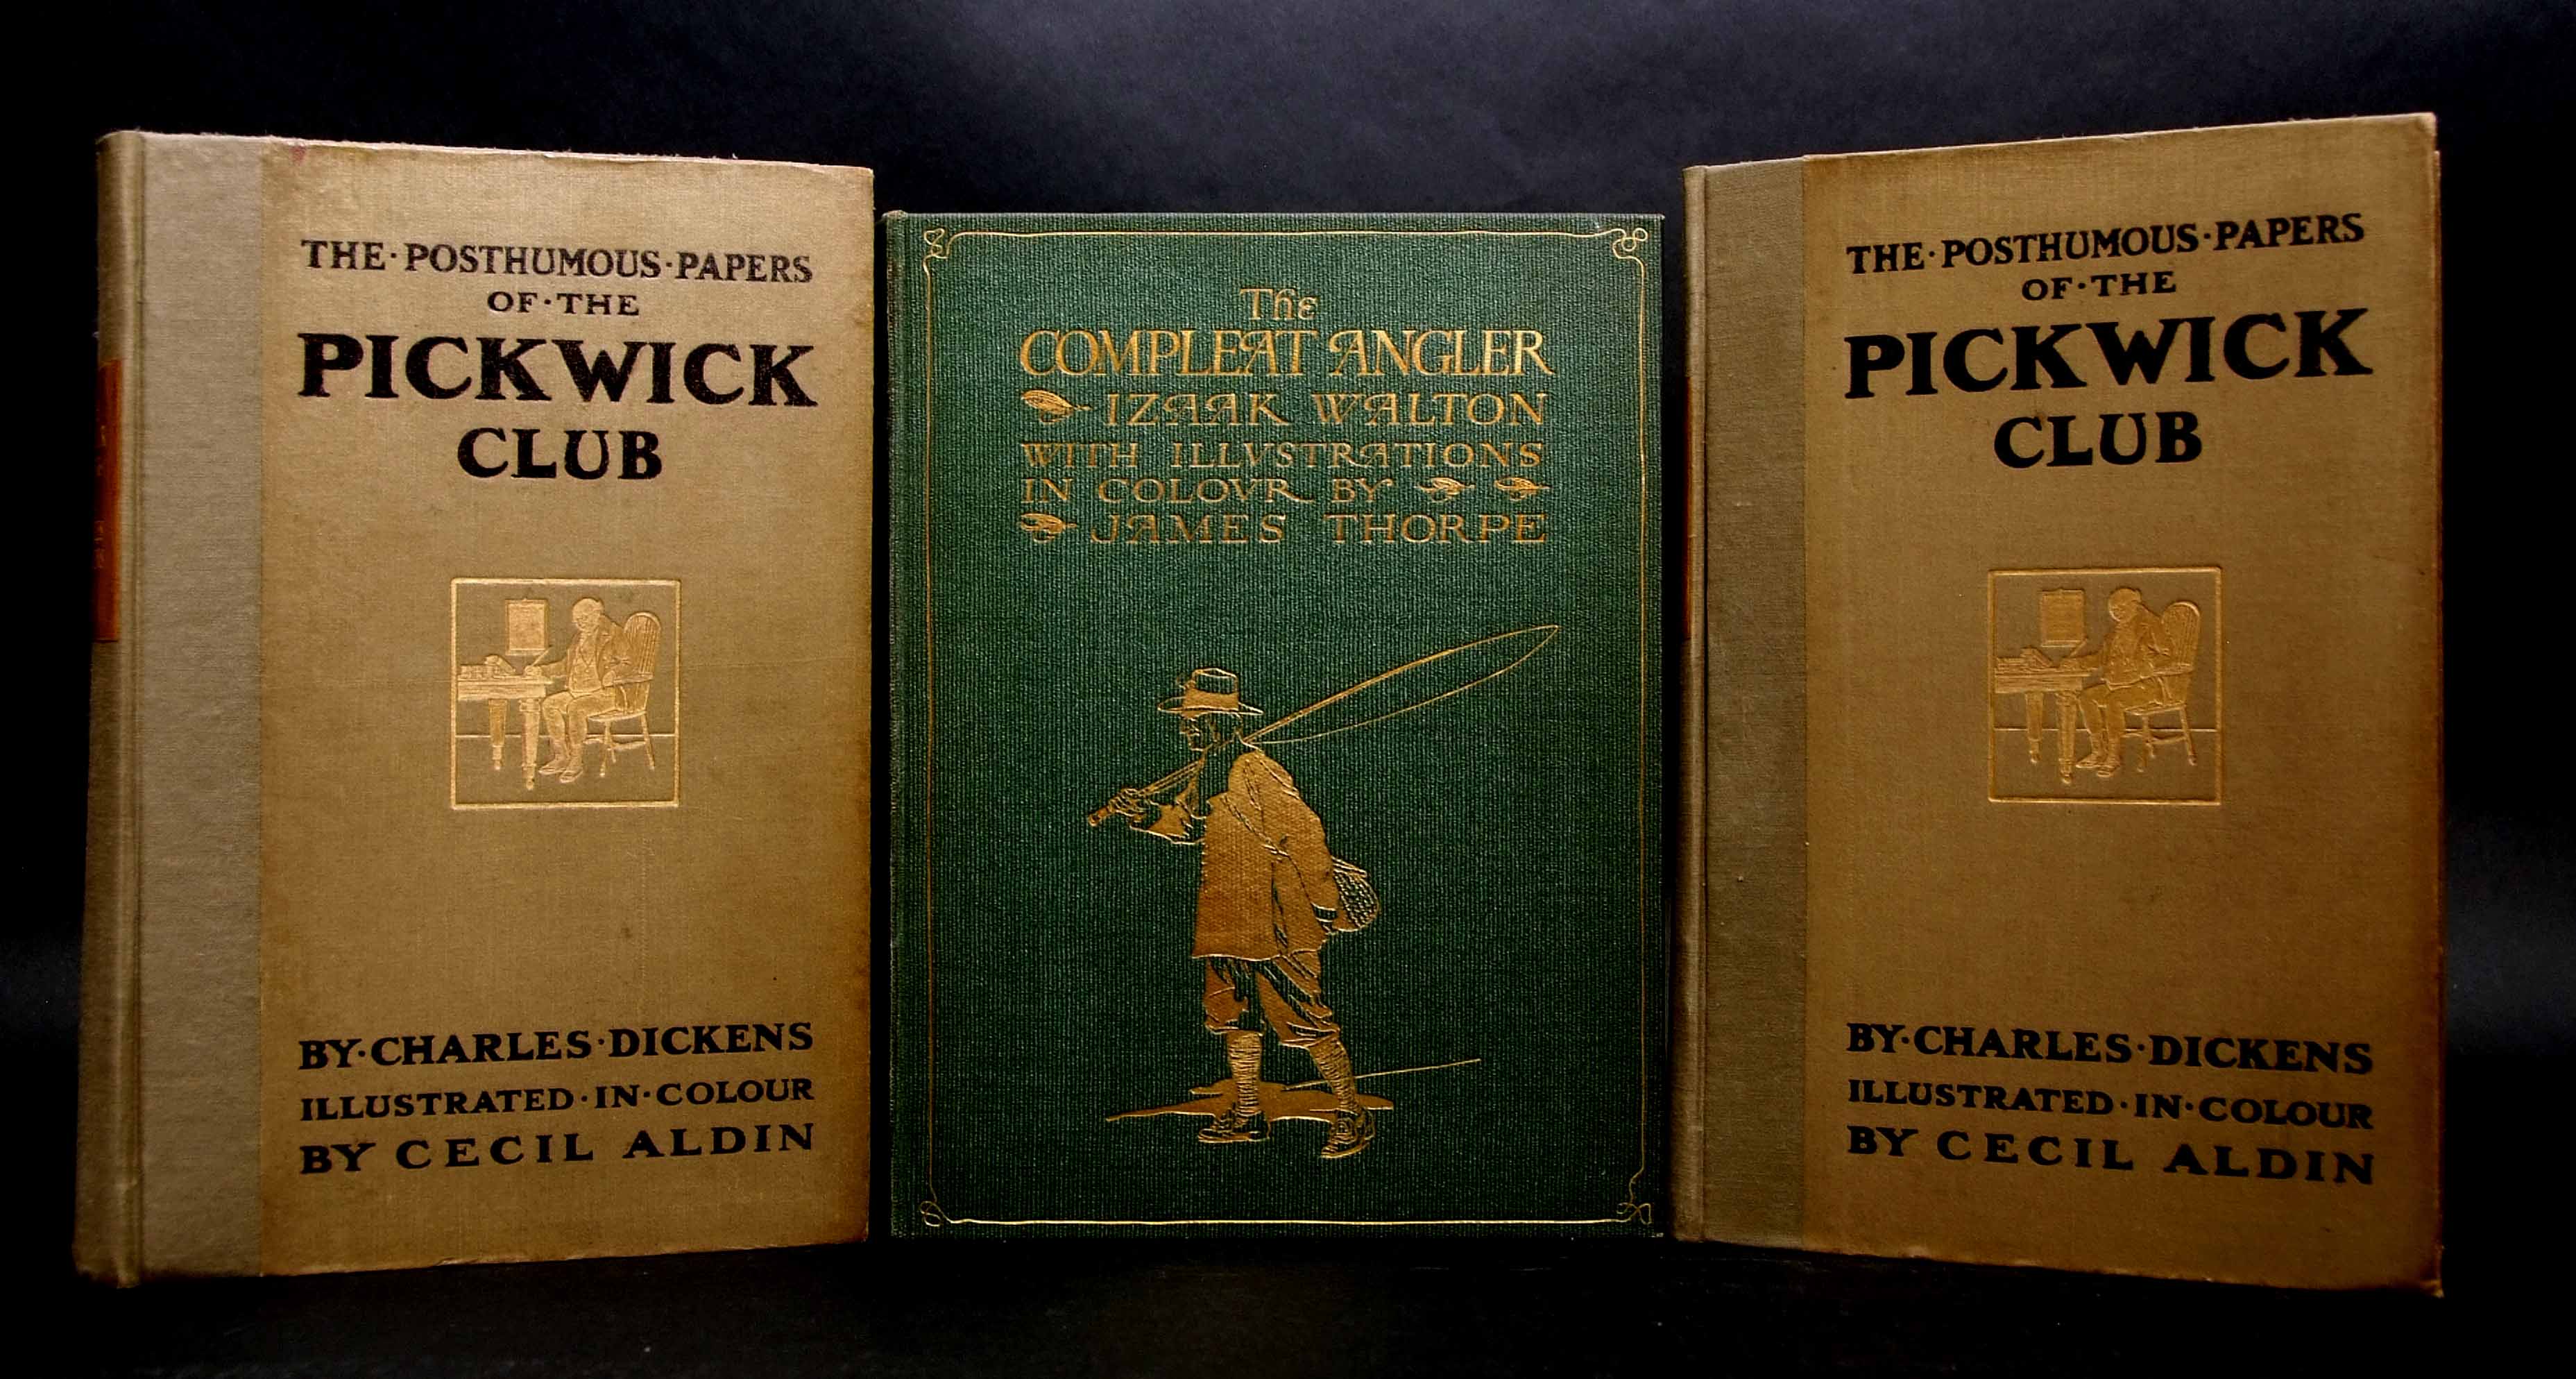 CHARLES DICKENS: THE POSTHUMOUS PAPERS OF THE PICKWICK CLUB, London, 1910, 1st edition, 2 volumes,